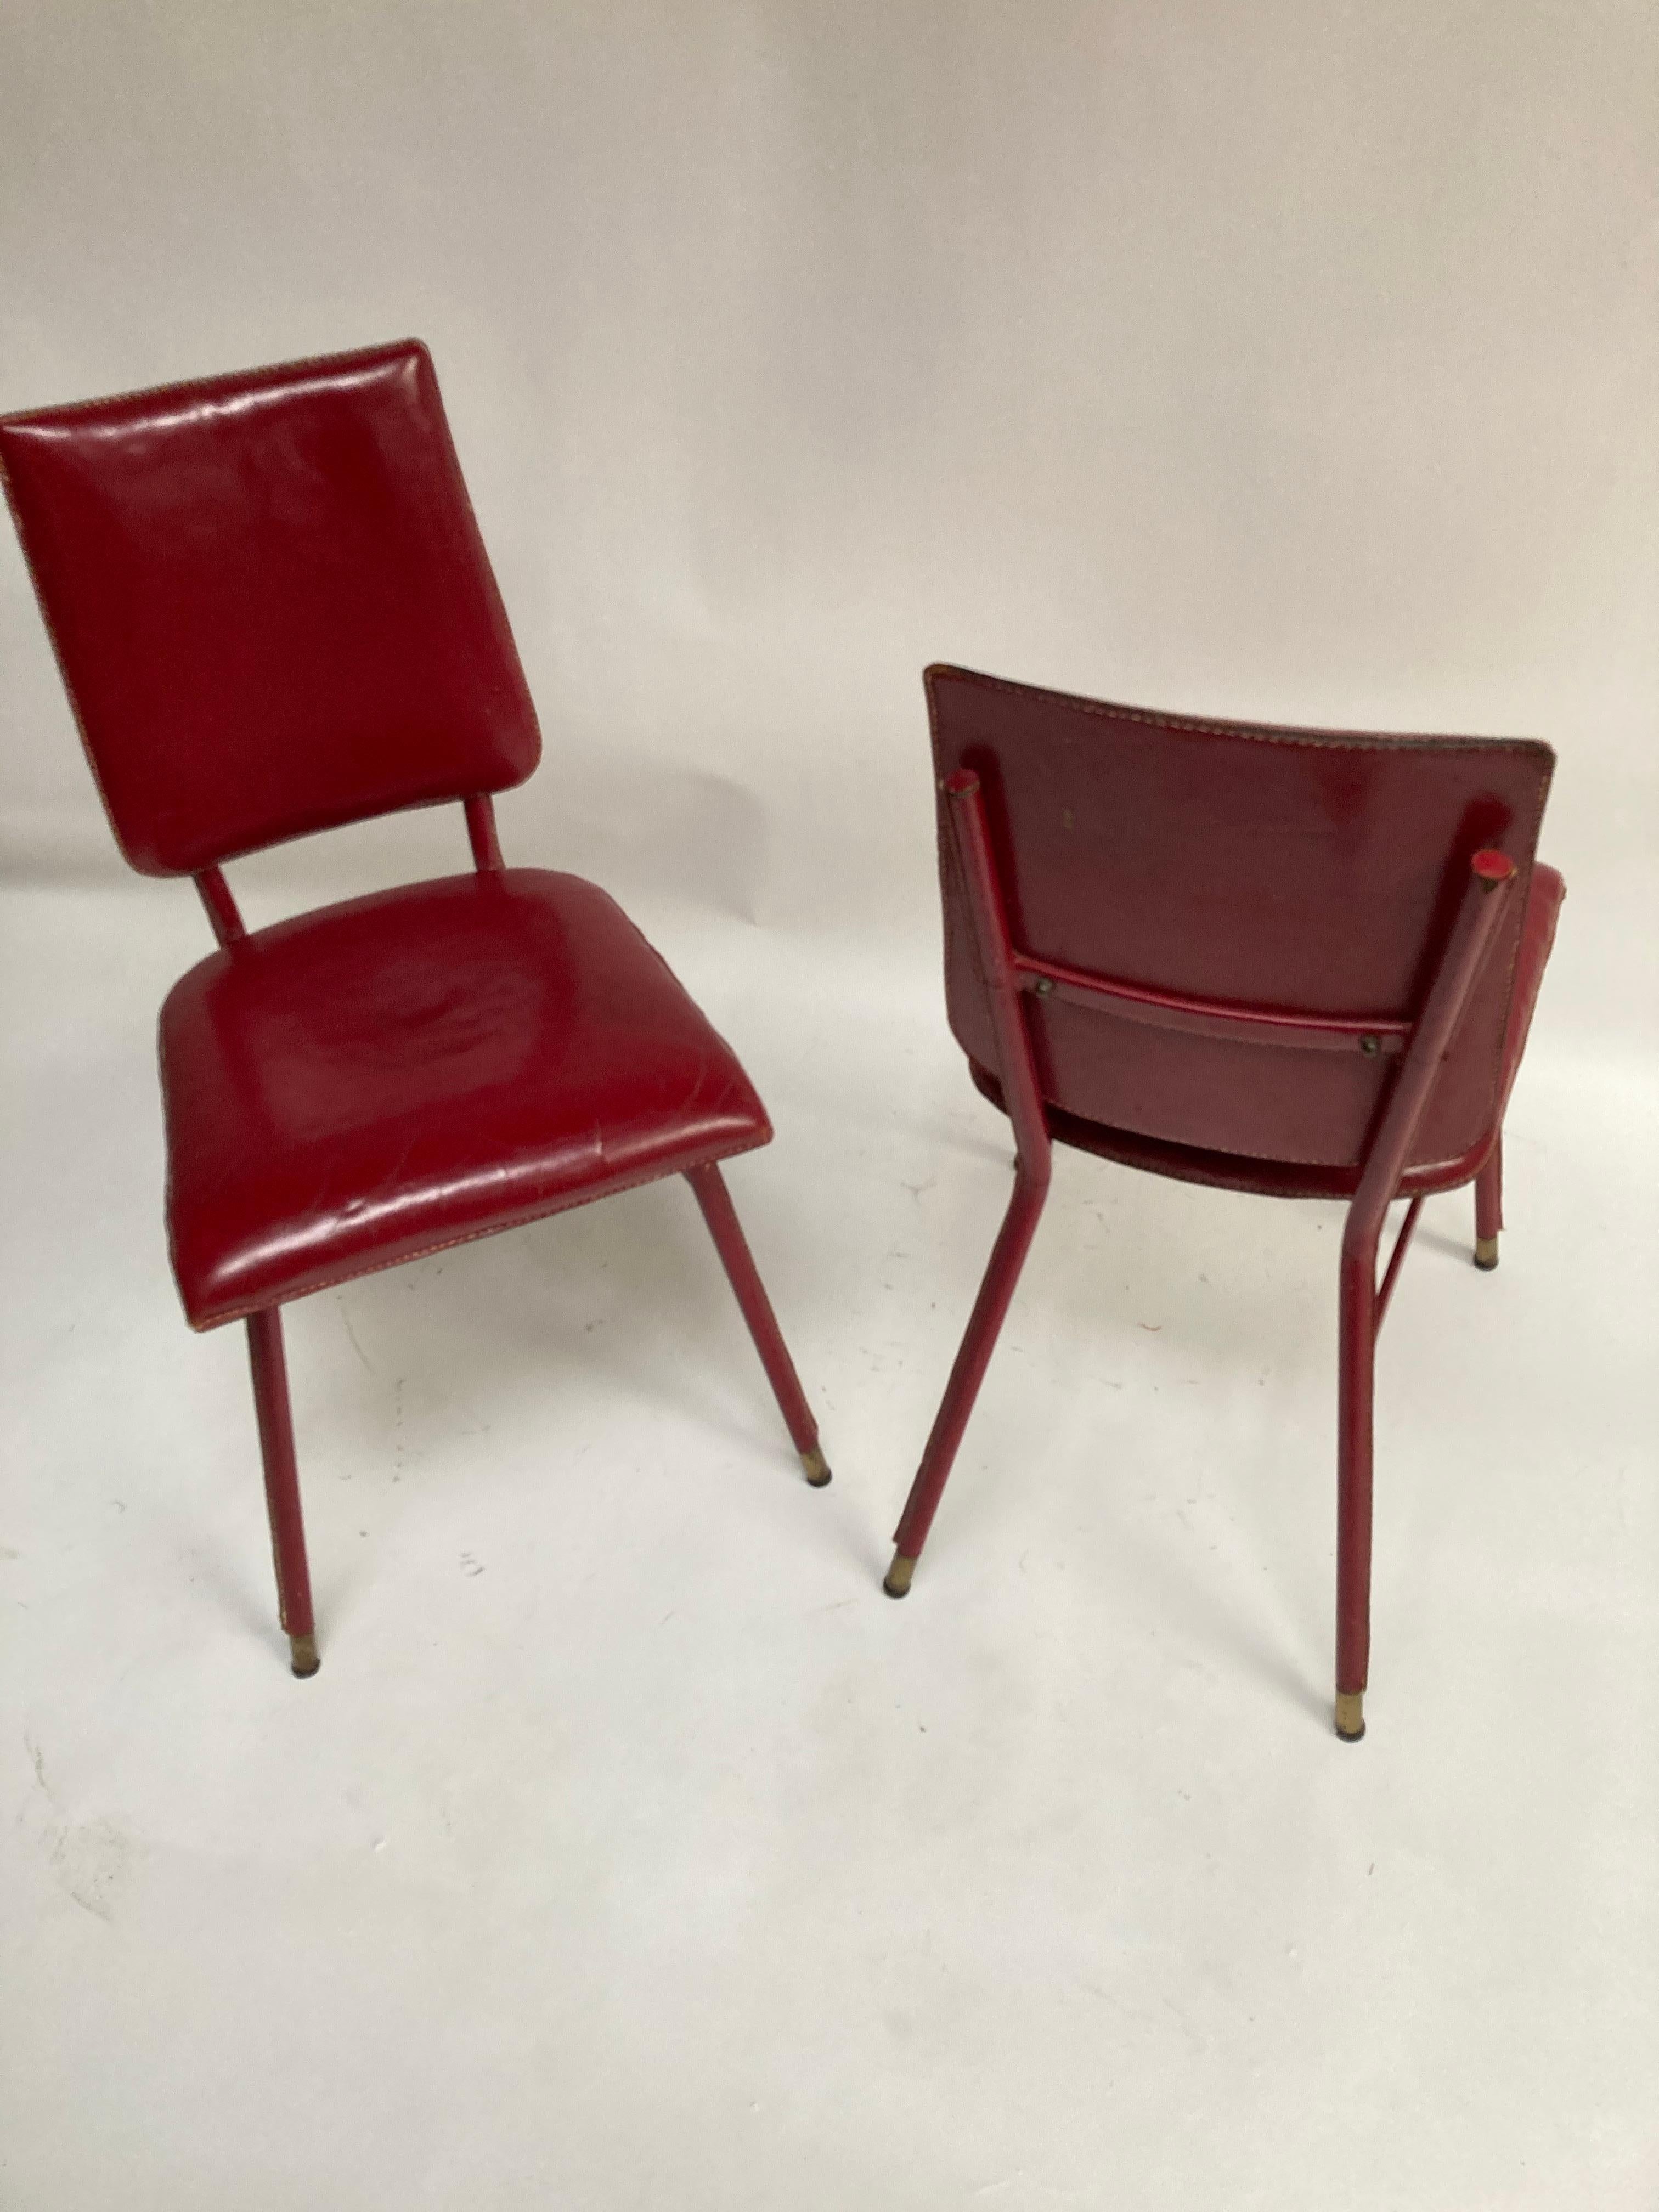 French Pair of 1950's Red Stitched Leather Chairs by Jacques Adnet For Sale